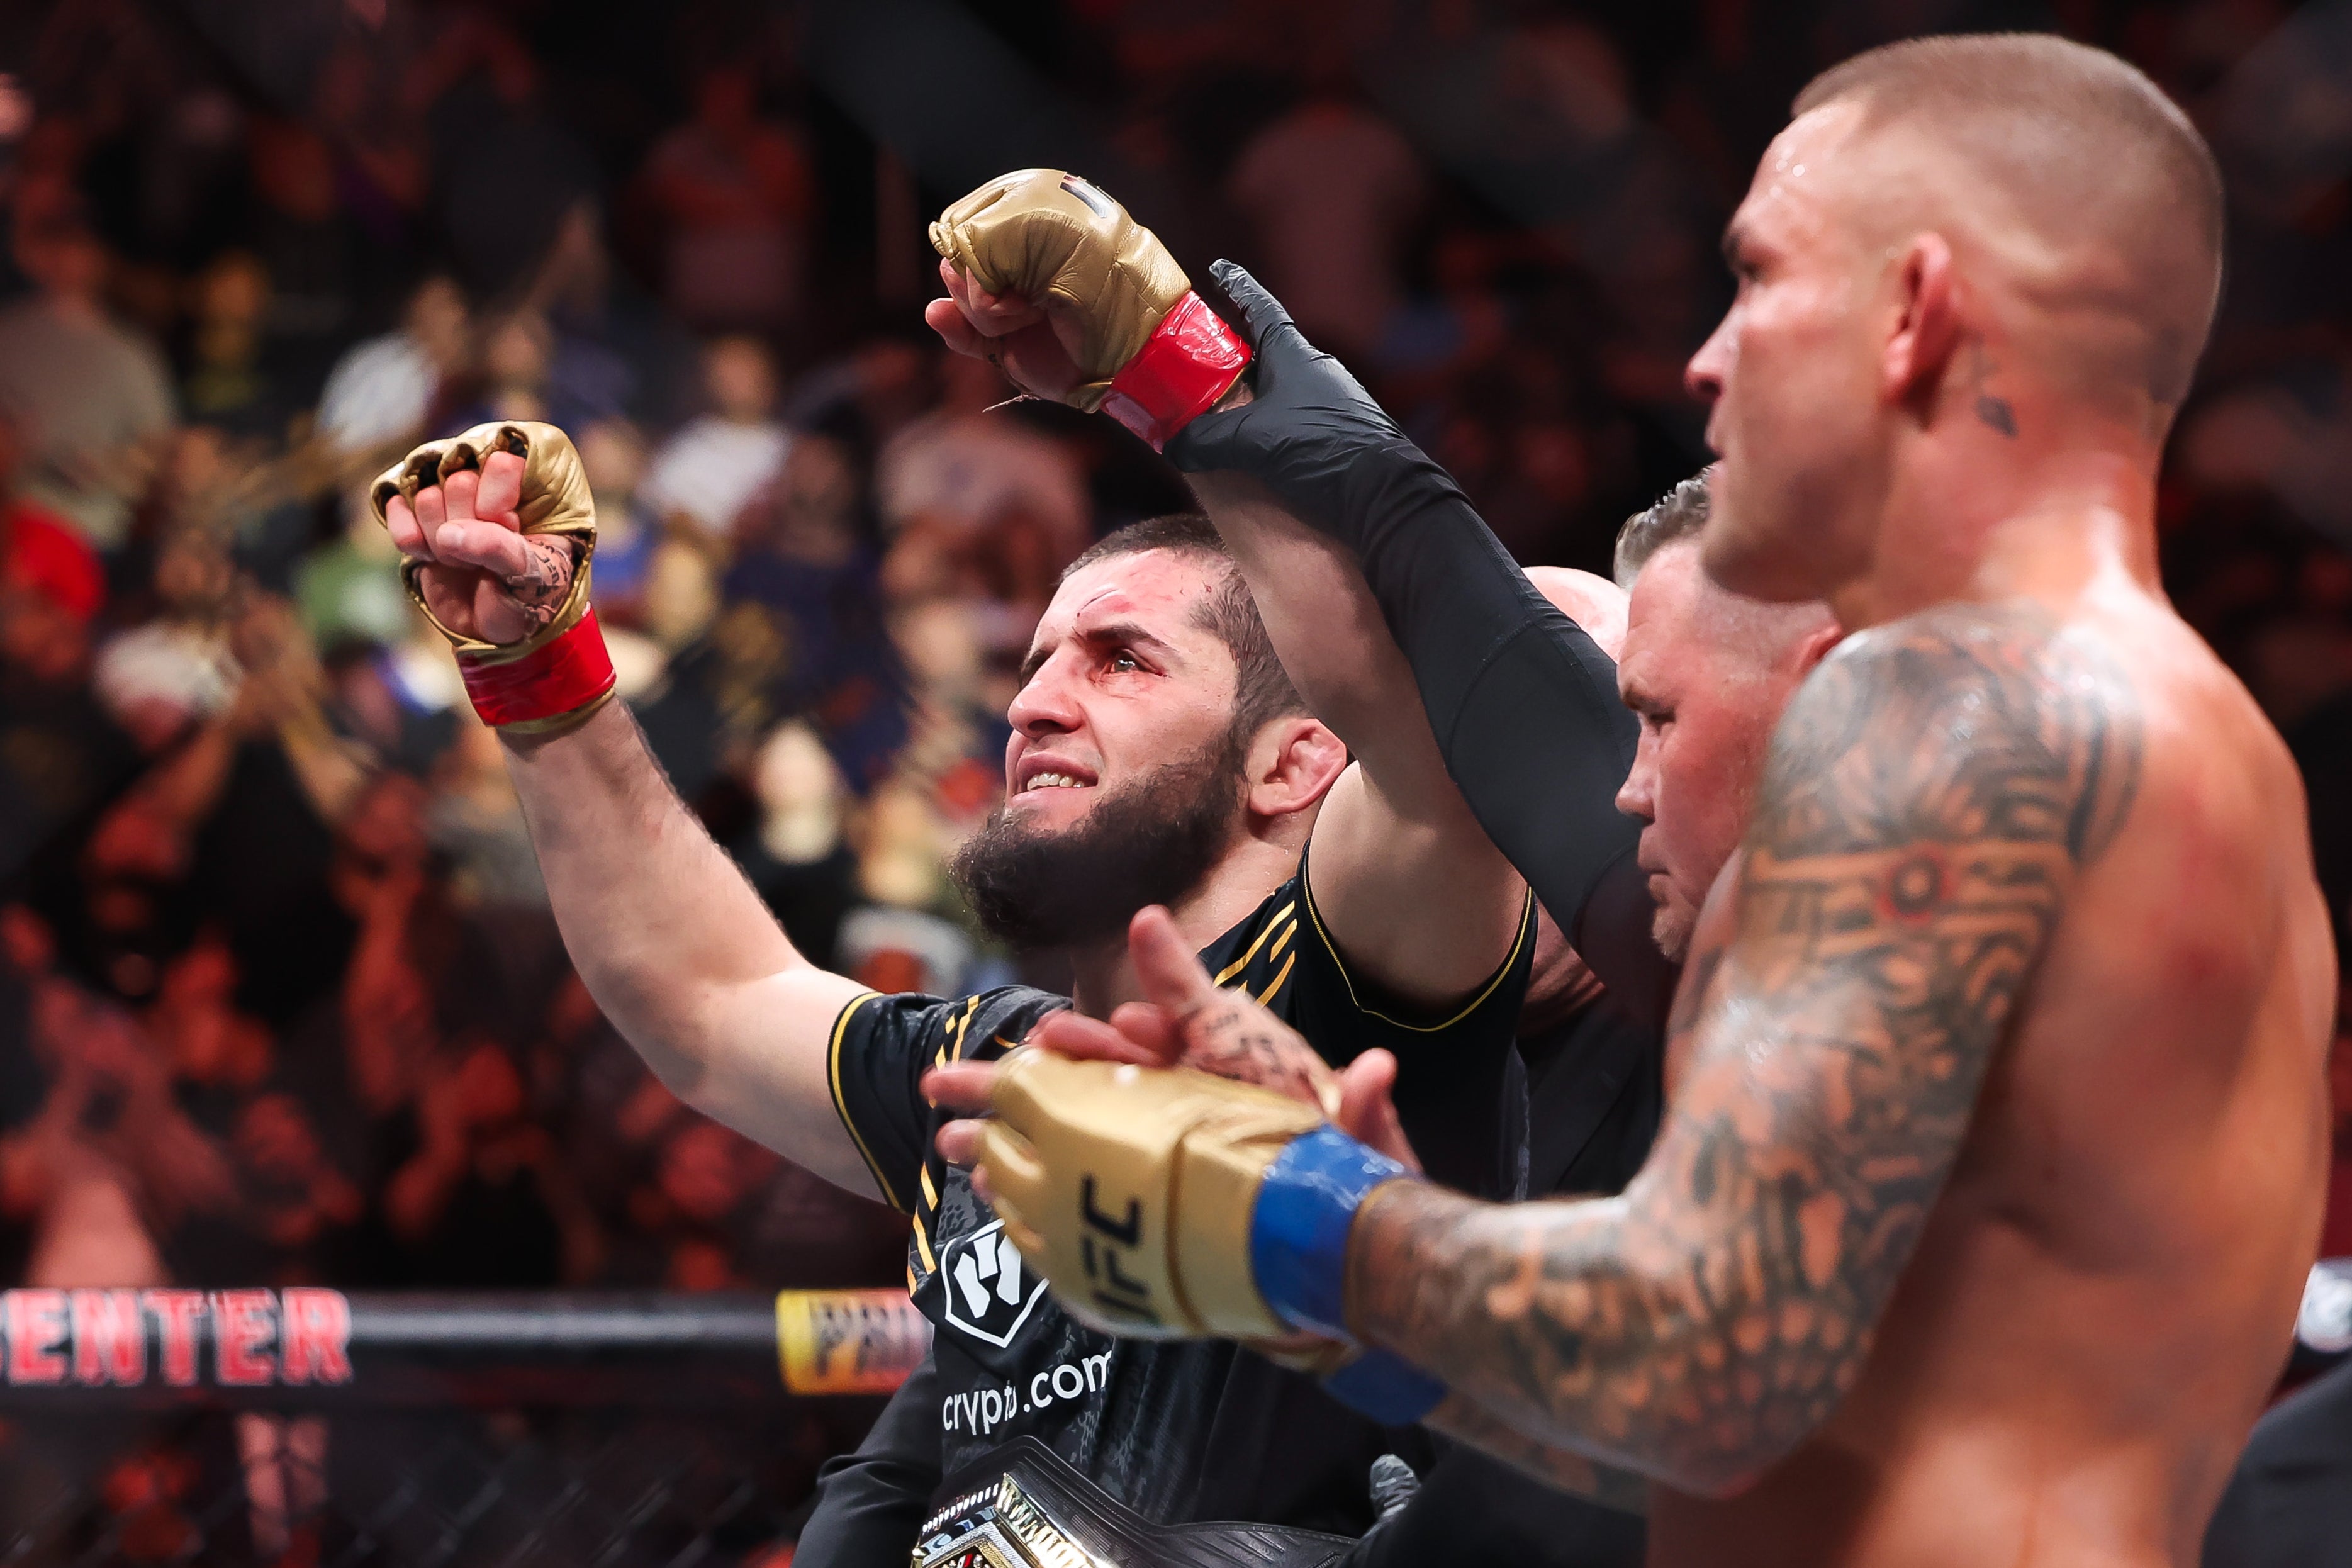 Makhachev, the UFC’s pound-for-pound No 1 fight, recorded a third successful title defence